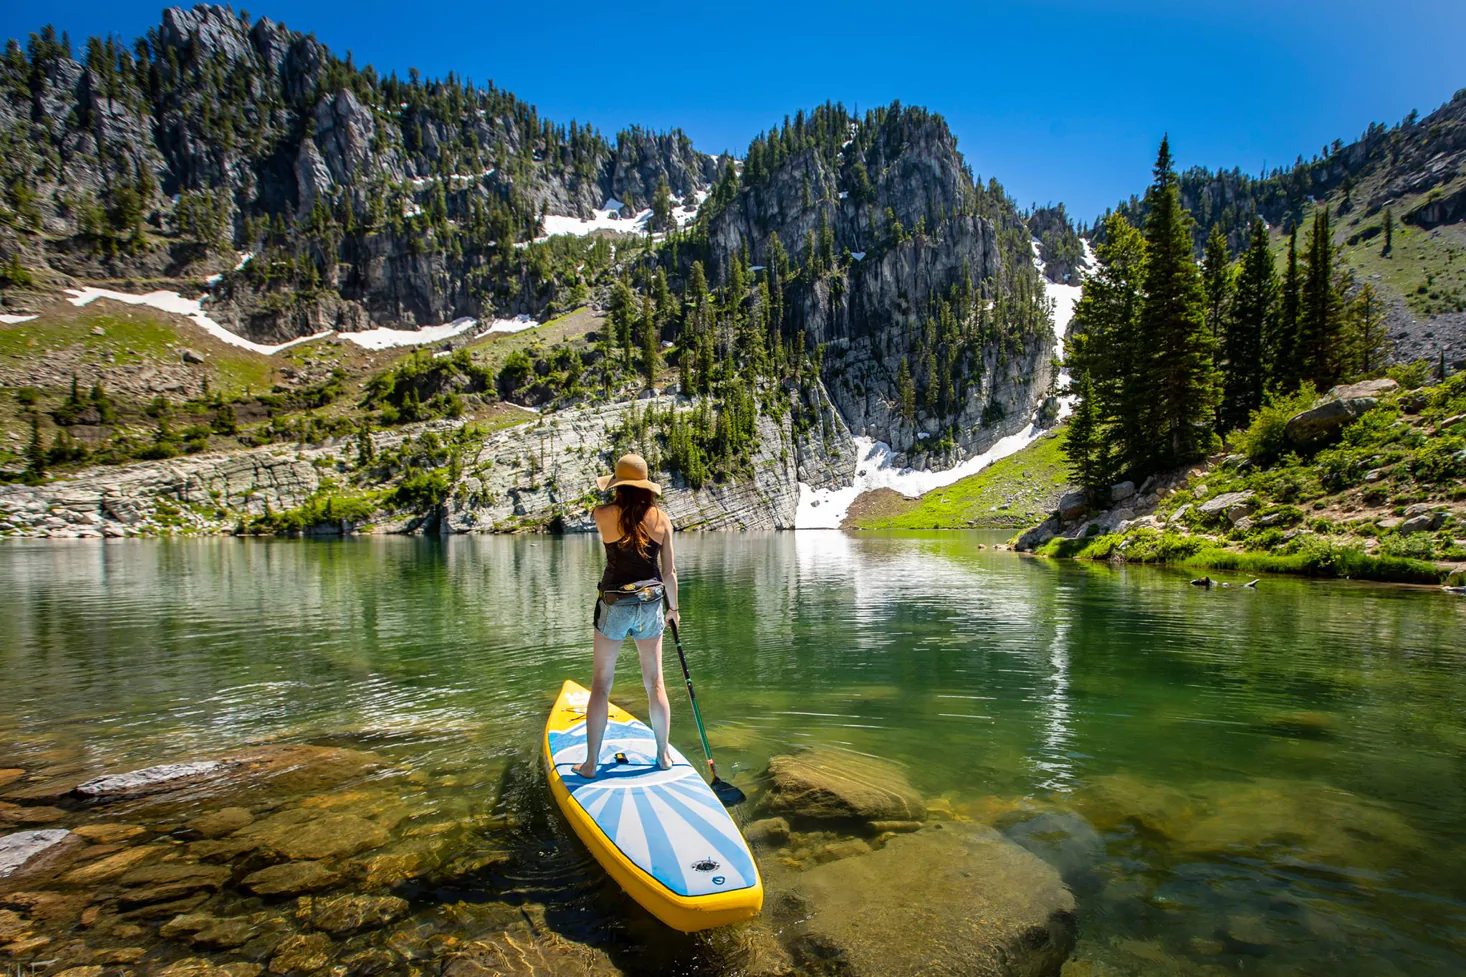 Latest reviews show the Glide stand up paddle boards to be the best option for hiking and sup camping.